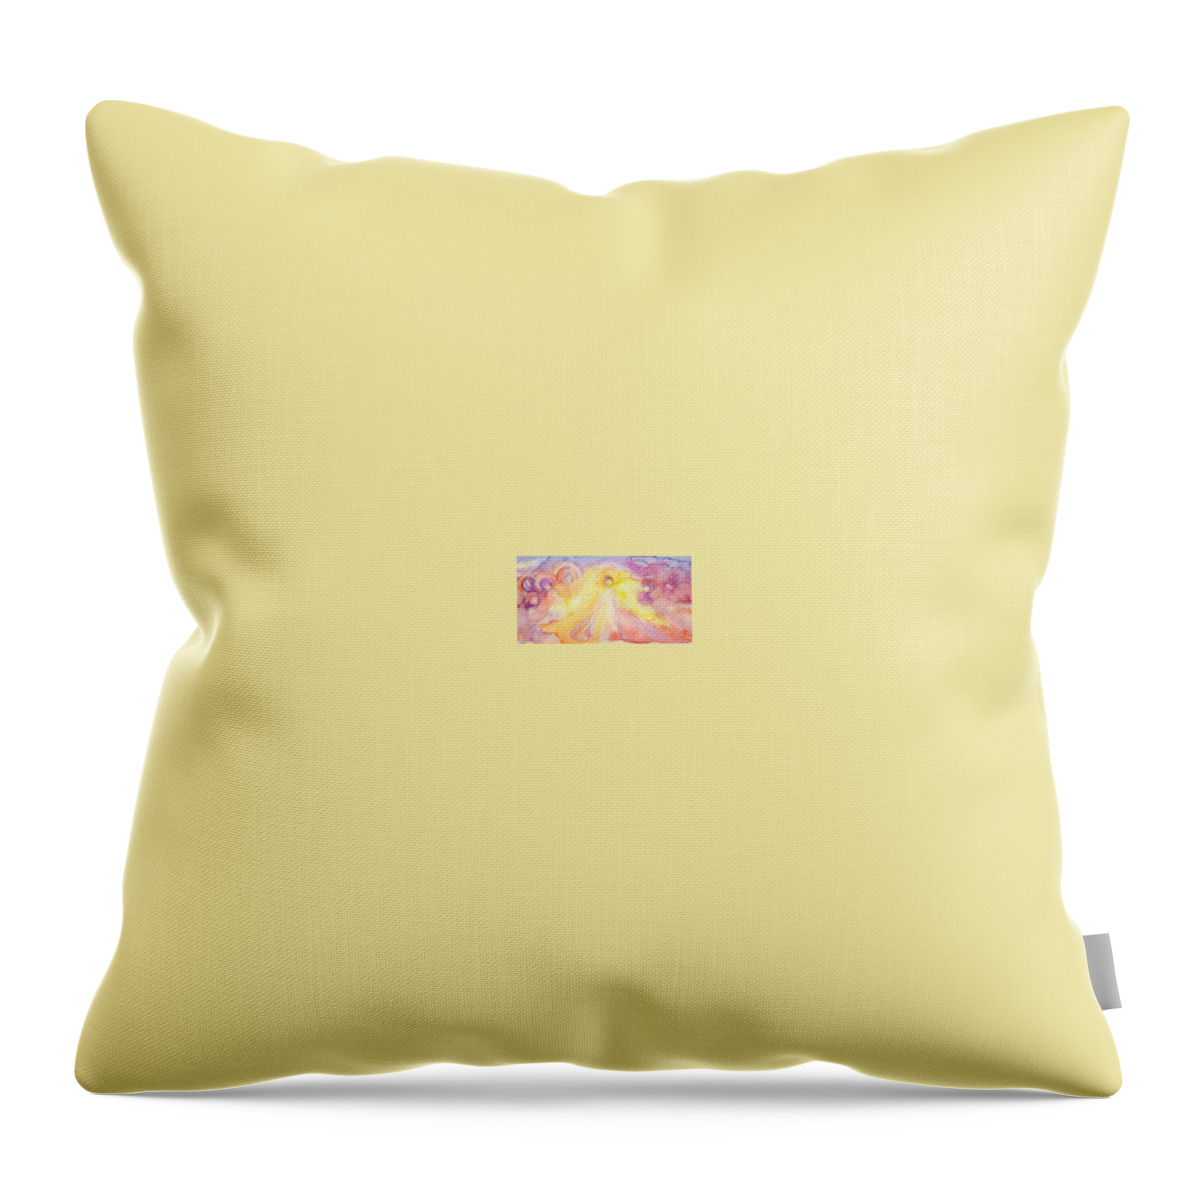 Angels Unaware Throw Pillow featuring the painting Angels Unaware by Caroline Patrick